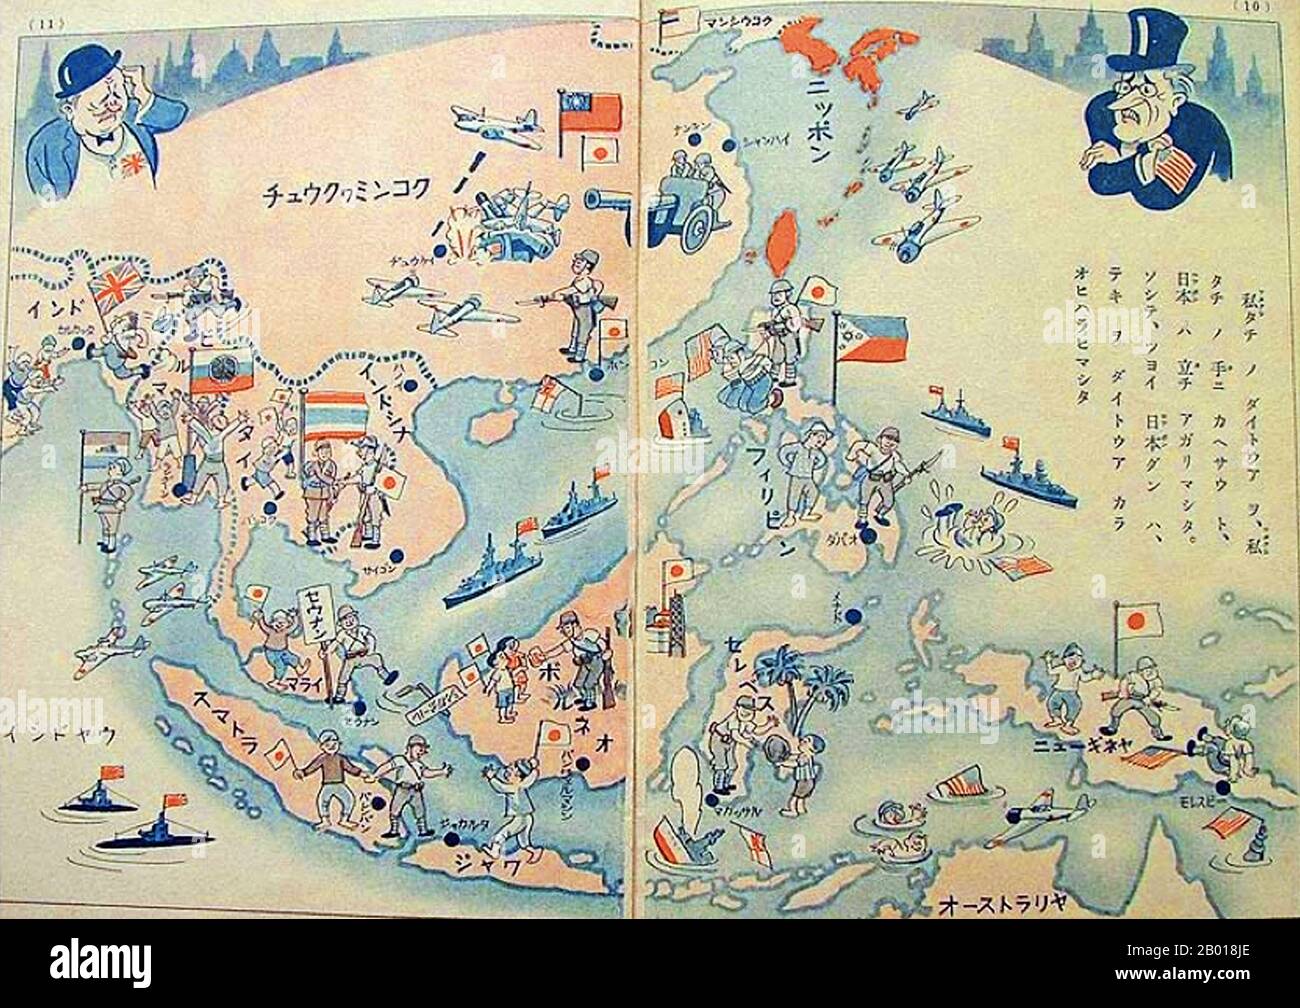 Japan: Imperial Japan's proposed 'Greater East Asia Co-Prosperity Sphere', from the Daitoa Kyodo Sengen ('Manifesto for Greater East Asian Cooperation'), a propaganda booklet for children, c. 1943.  The Greater East Asia Co-Prosperity Sphere (Dai-tō-a Kyōeiken) was a concept created and promulgated during the Shōwa era by the government and military of the Empire of Japan. It represented the desire to create a self-sufficient bloc of Asian nations led by the Japanese and free of Western powers. Stock Photo